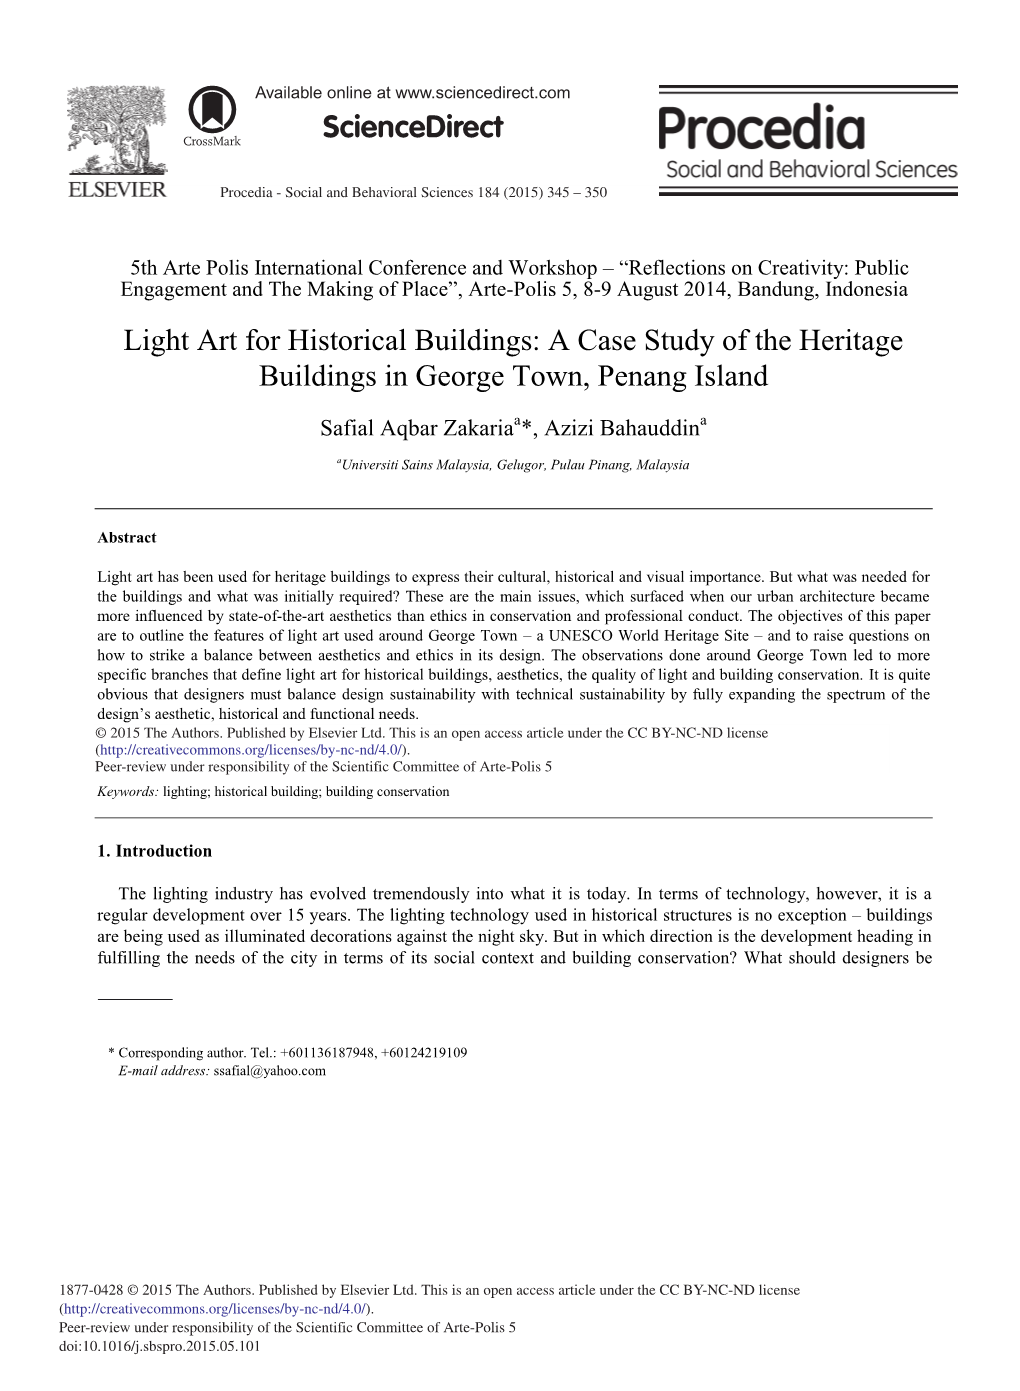 Light Art for Historical Buildings: a Case Study of the Heritage Buildings in George Town, Penang Island